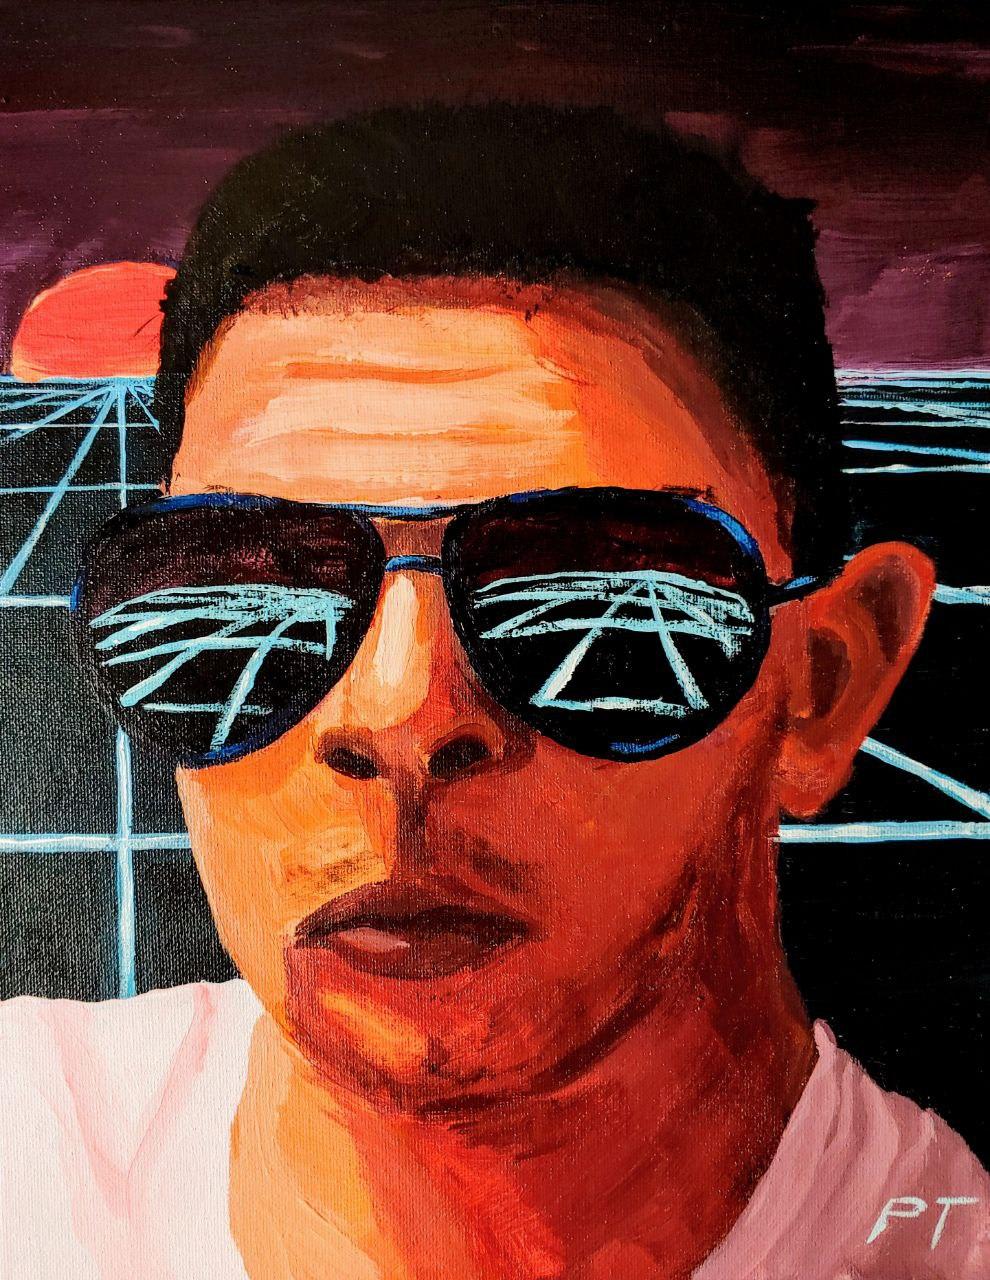 Friend of mine wanted me to paint his portrait in an Outrun style, so here it is! Acrylic on Canvas